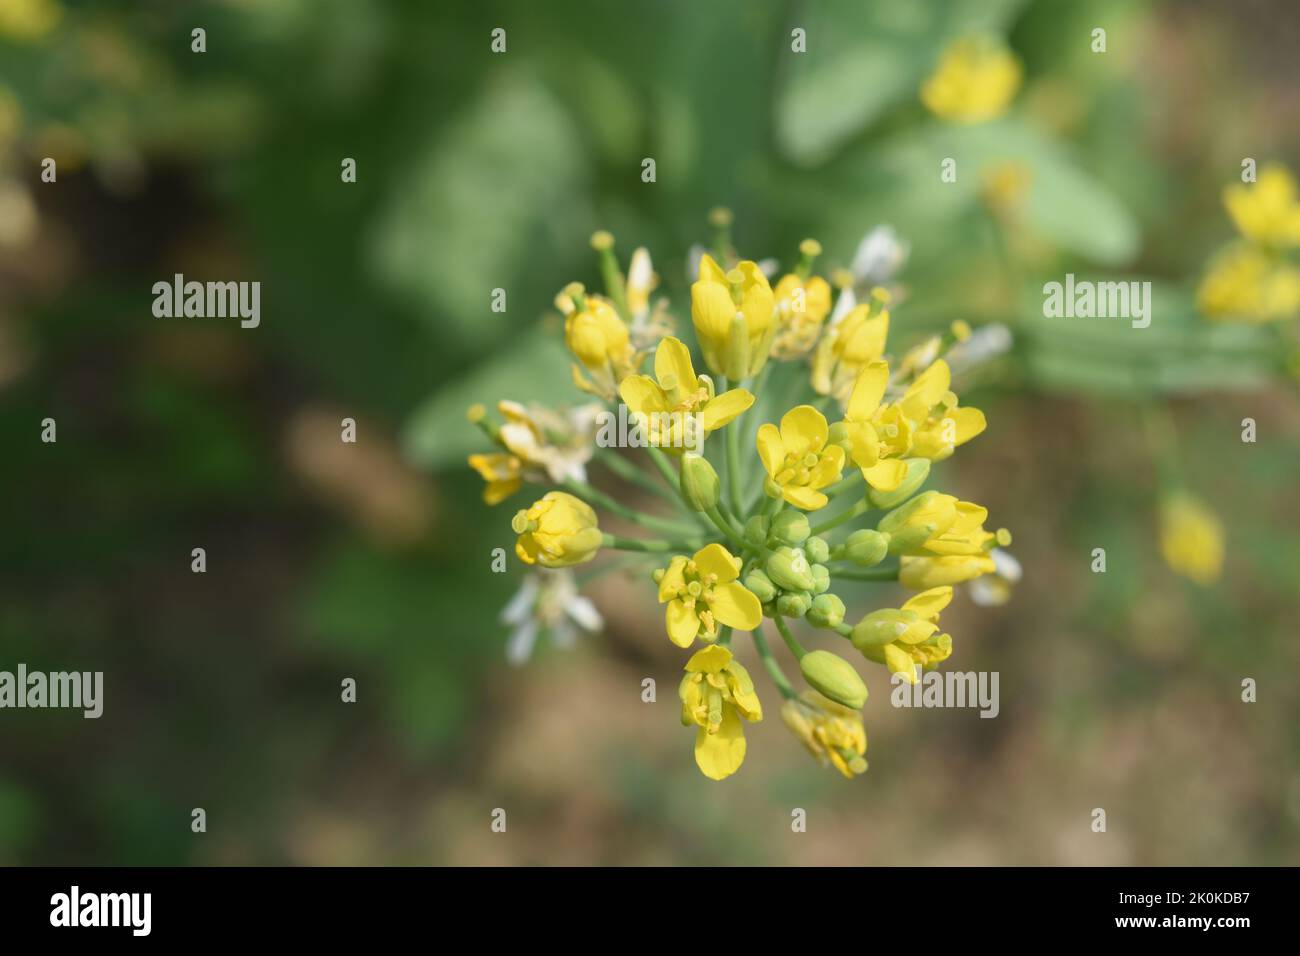 Closeup view of the mustard flower, it forms four petals and six stamens Stock Photo